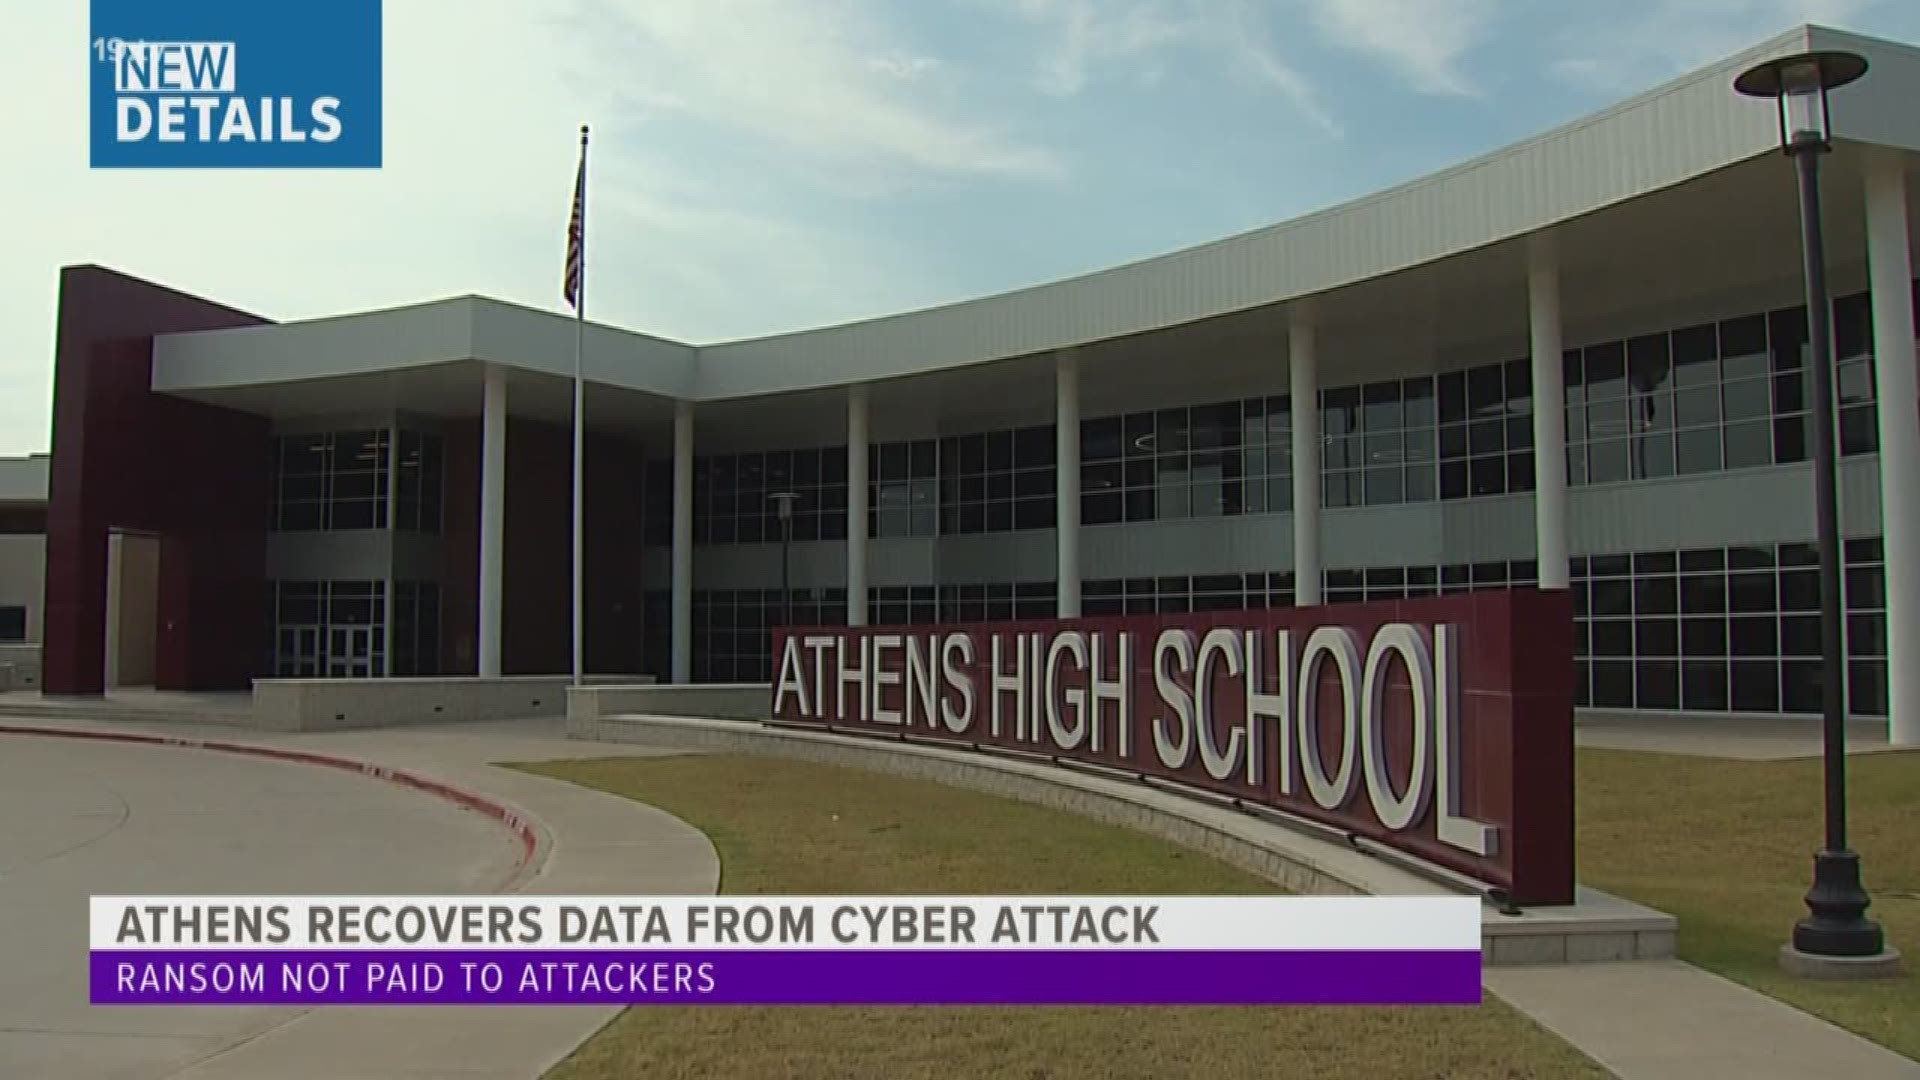 The district said no one's personal data was compromised in the attack.